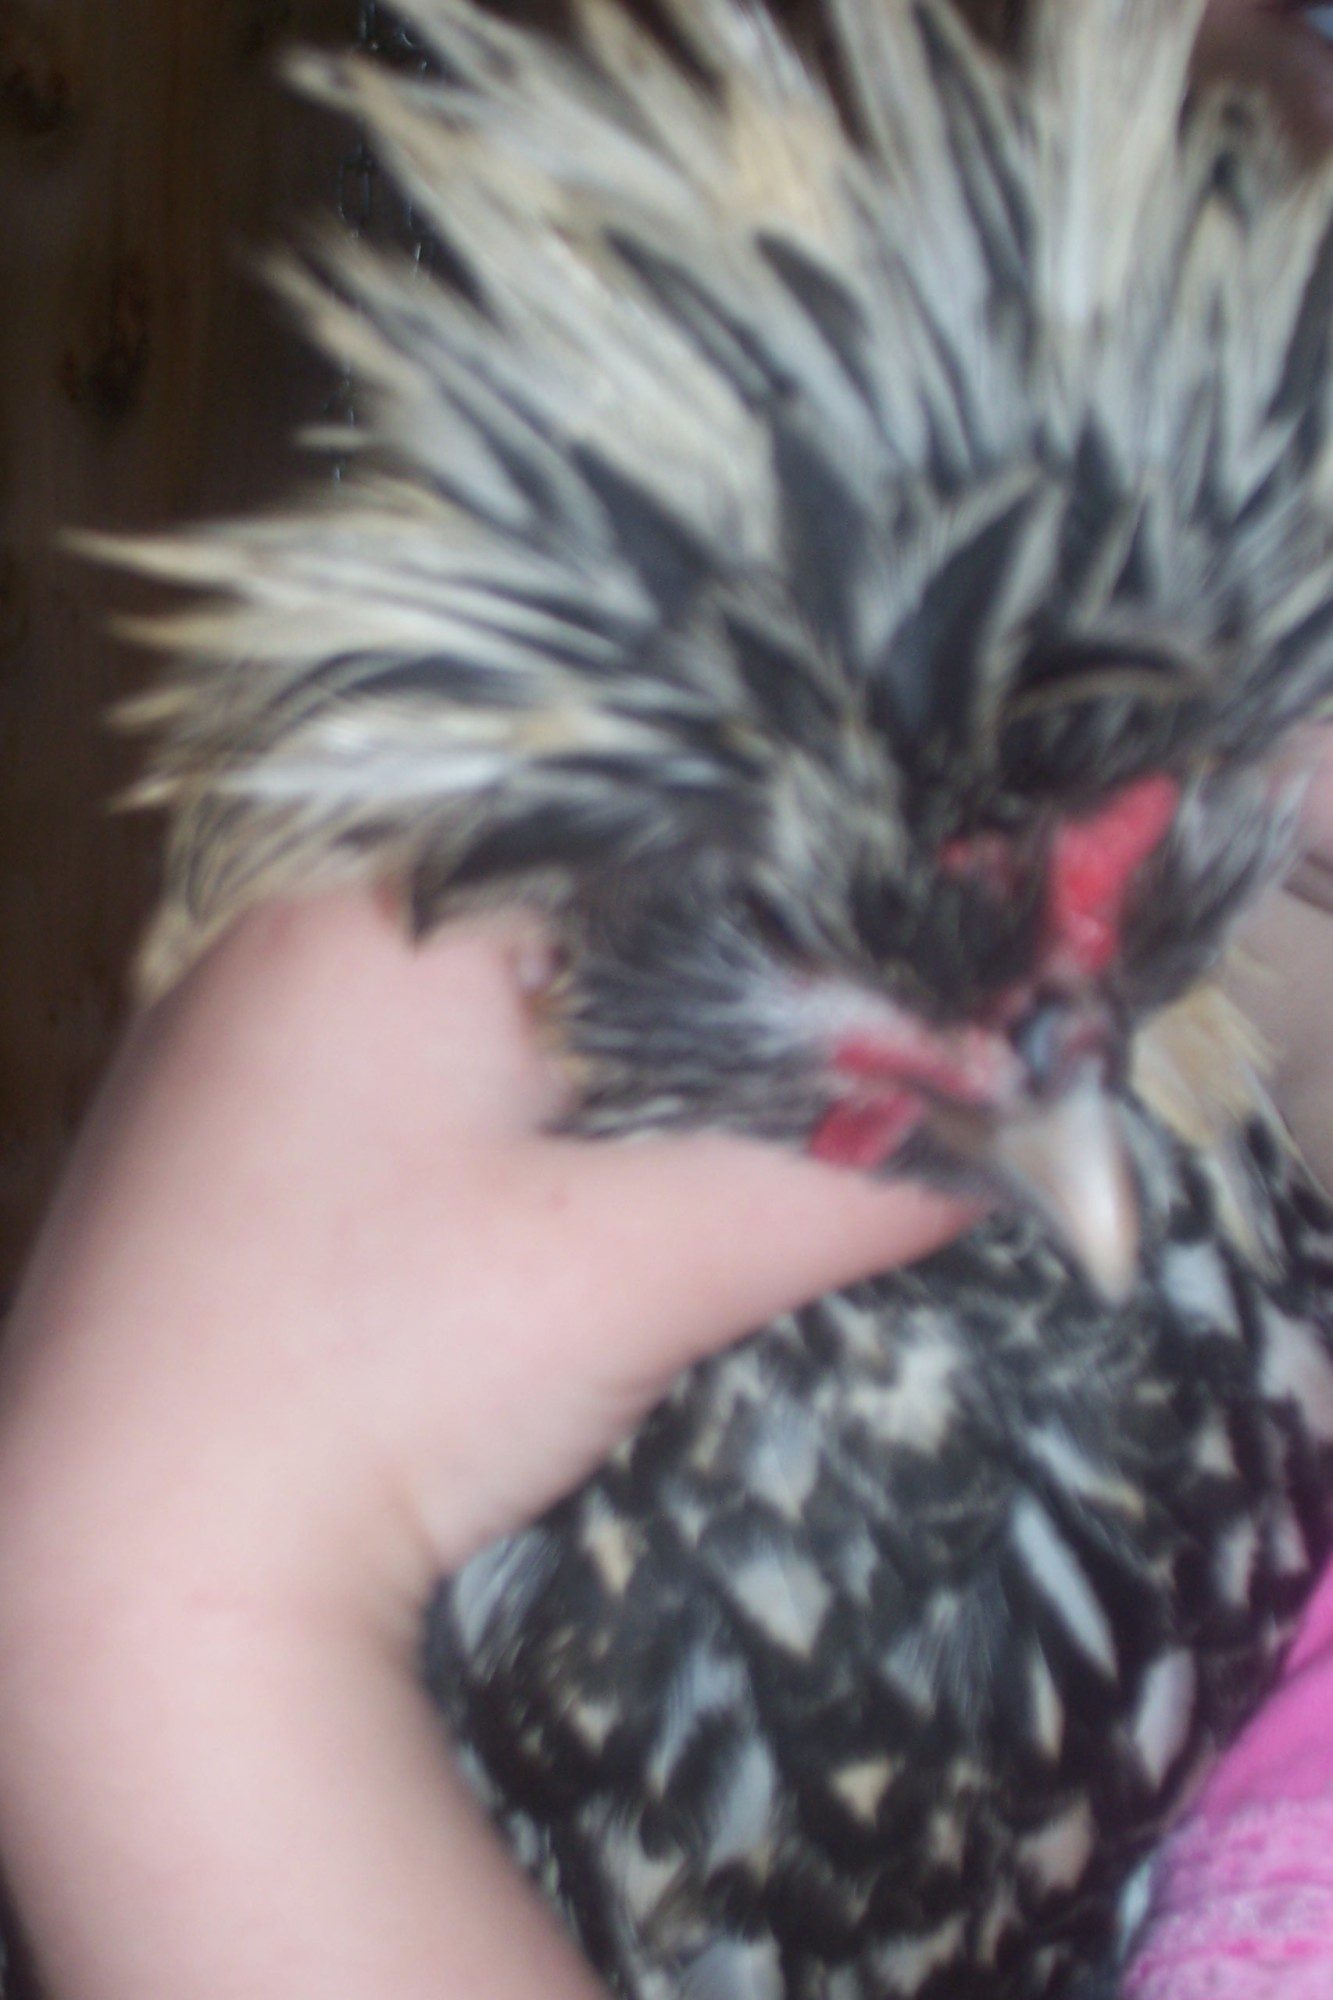 My Polish Rooster named: SilverMine